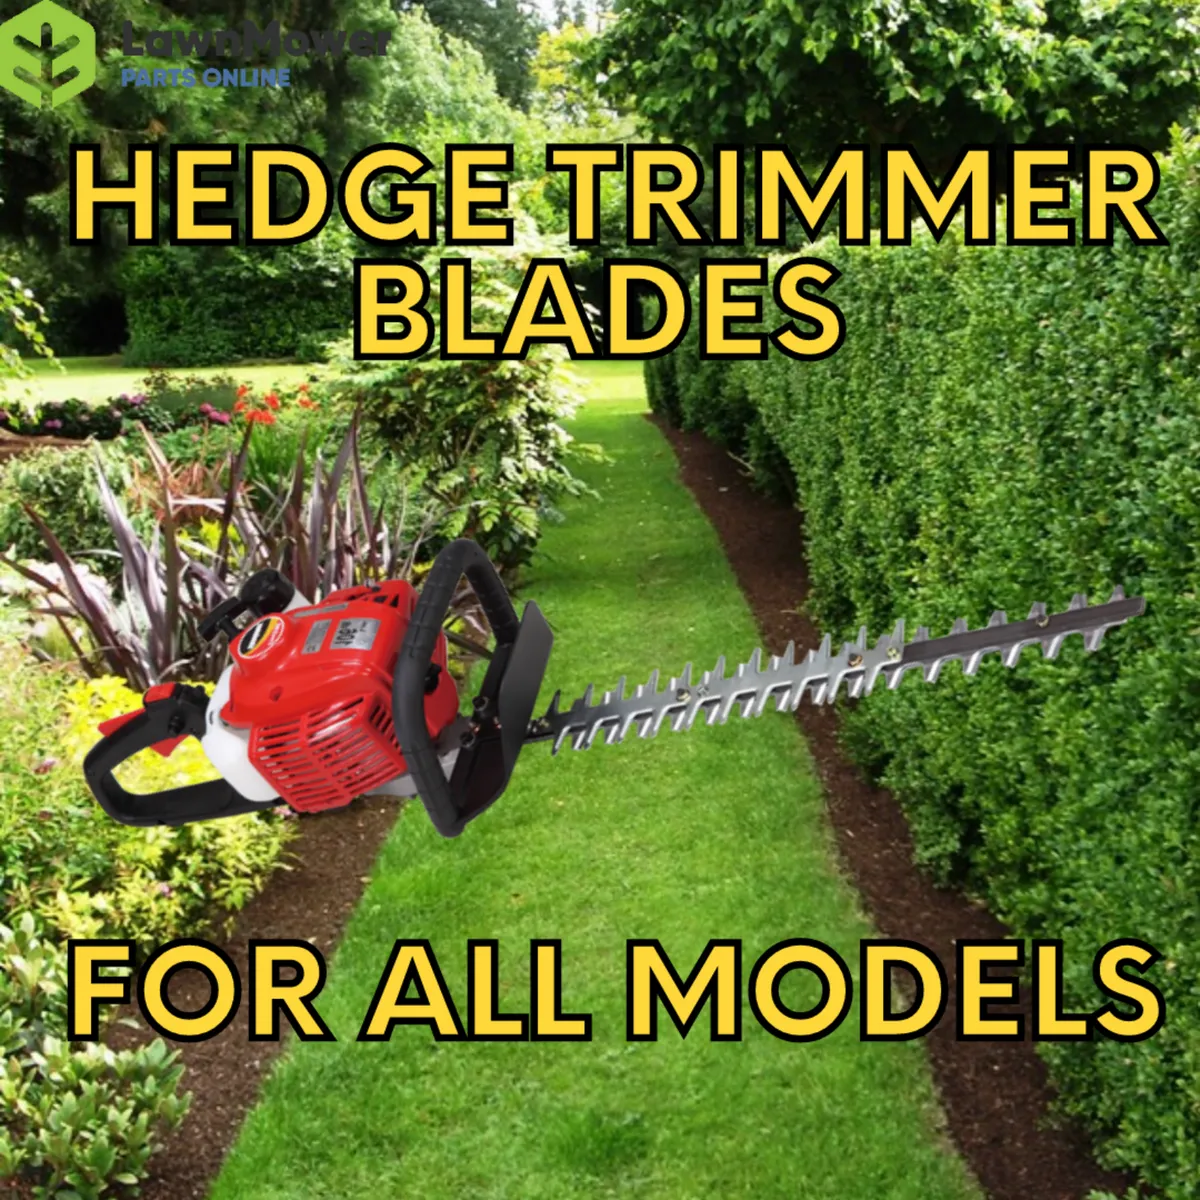 Hedgetrimmer Blades - FREE Delivery - Image 1